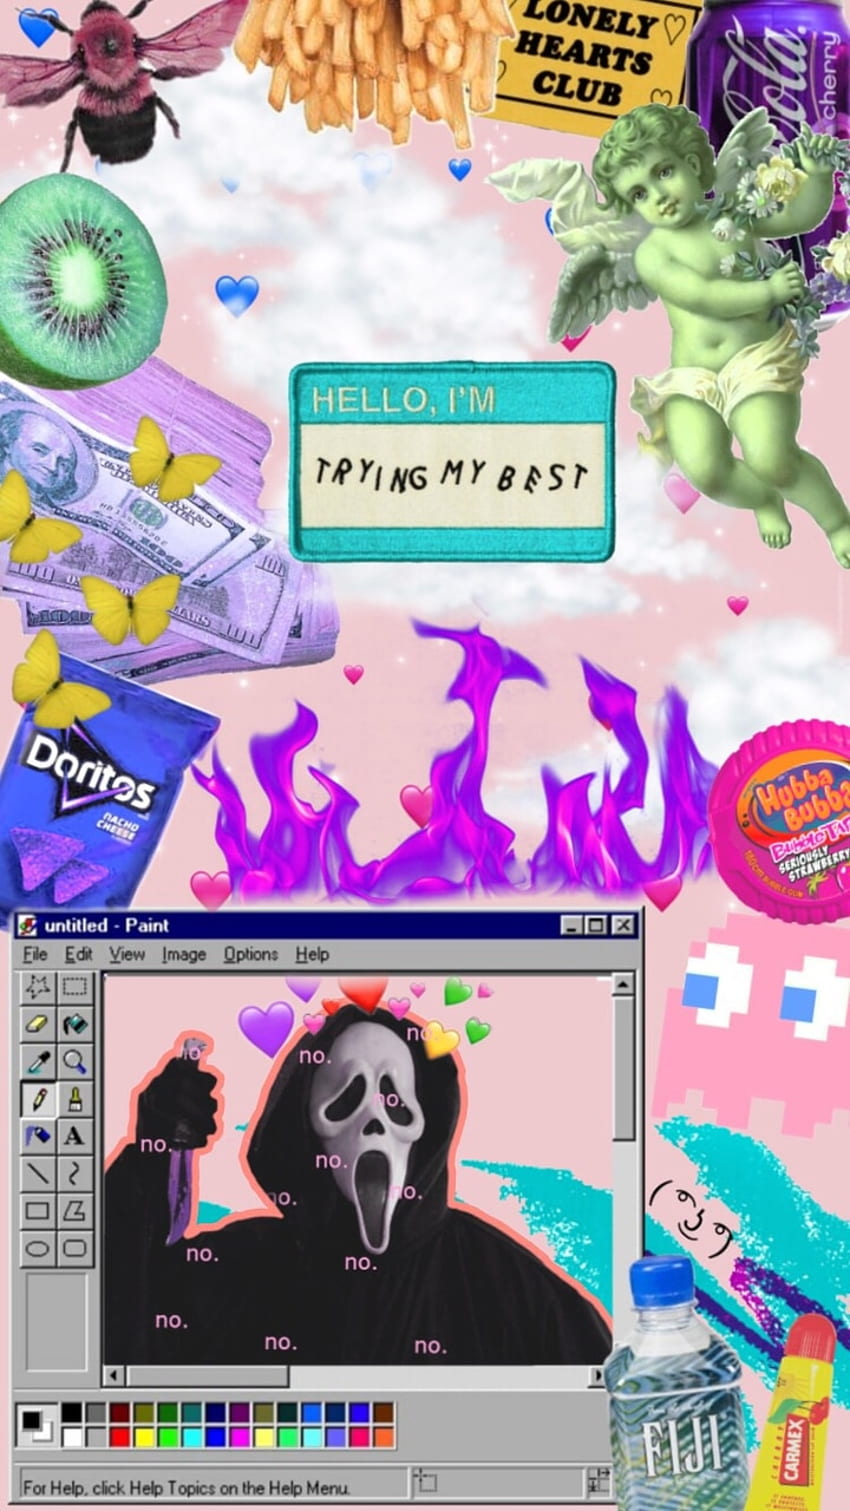 A computer screen with various items on it - 90s, Windows 98, Doritos, Ghostface